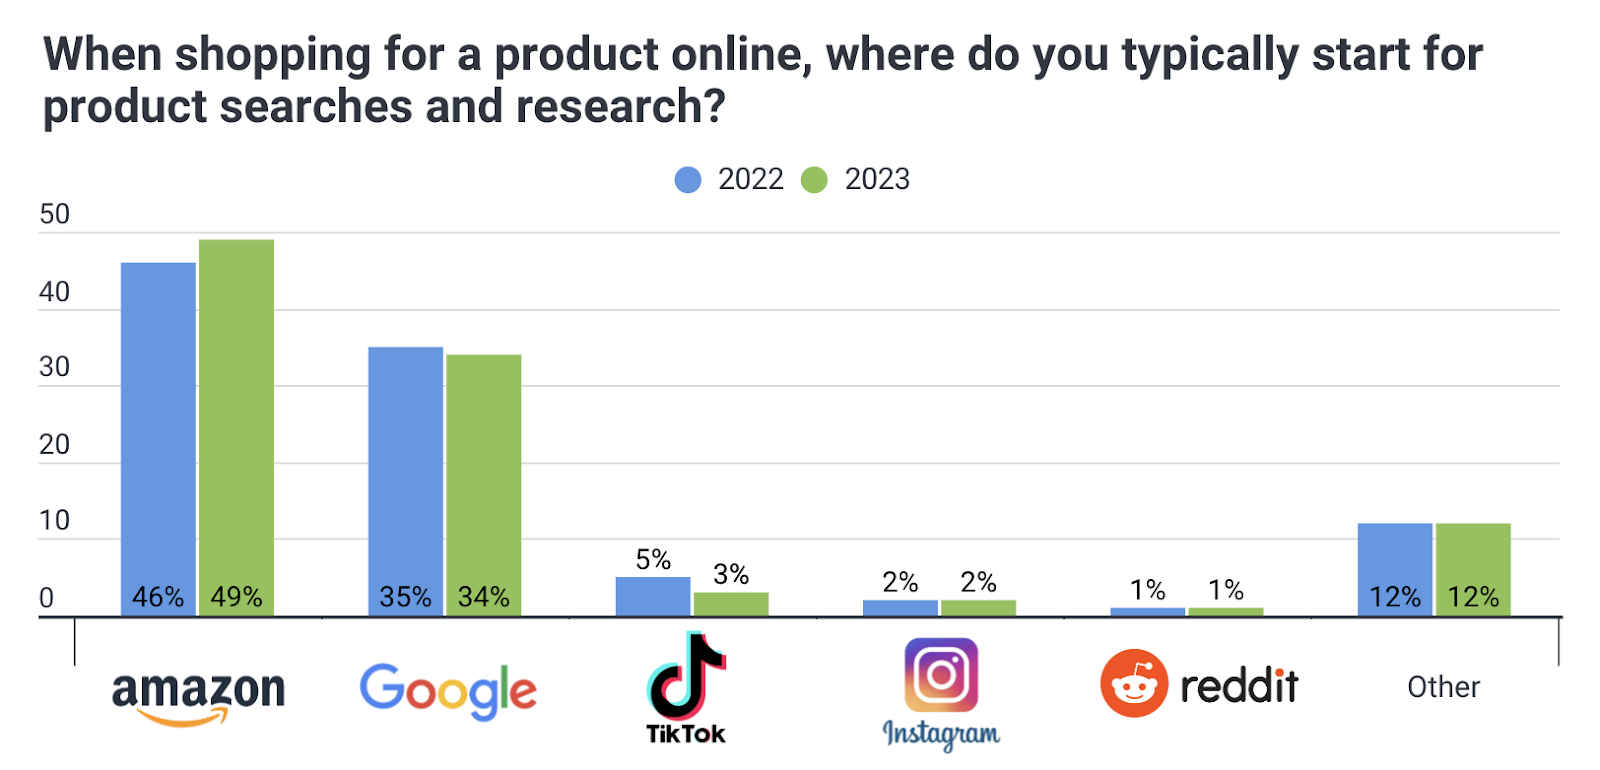 Where people start for product searches